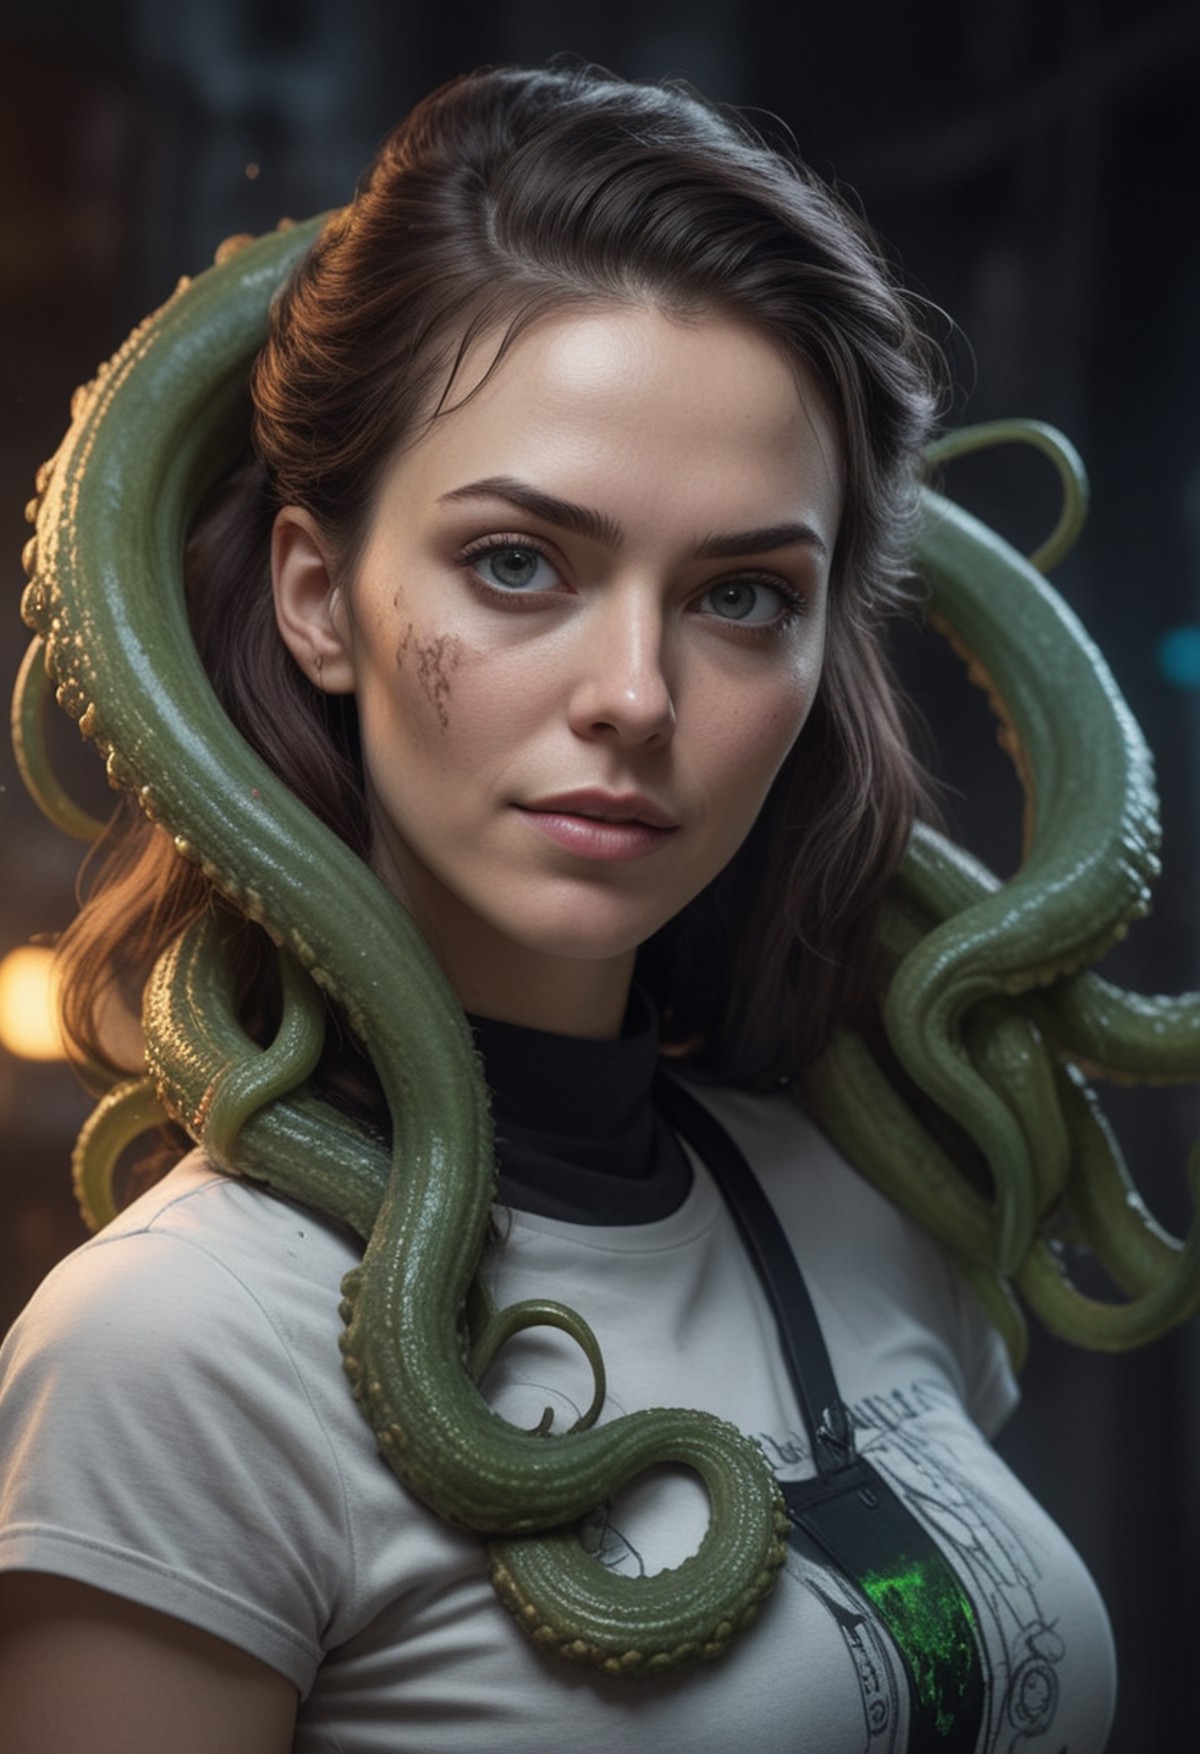 "Cosmic Eldritch Portrait: Photorealistic Cthulhu-Inspired Woman" - Picture a hyper-realistic RAW photo of a woman, blendi...